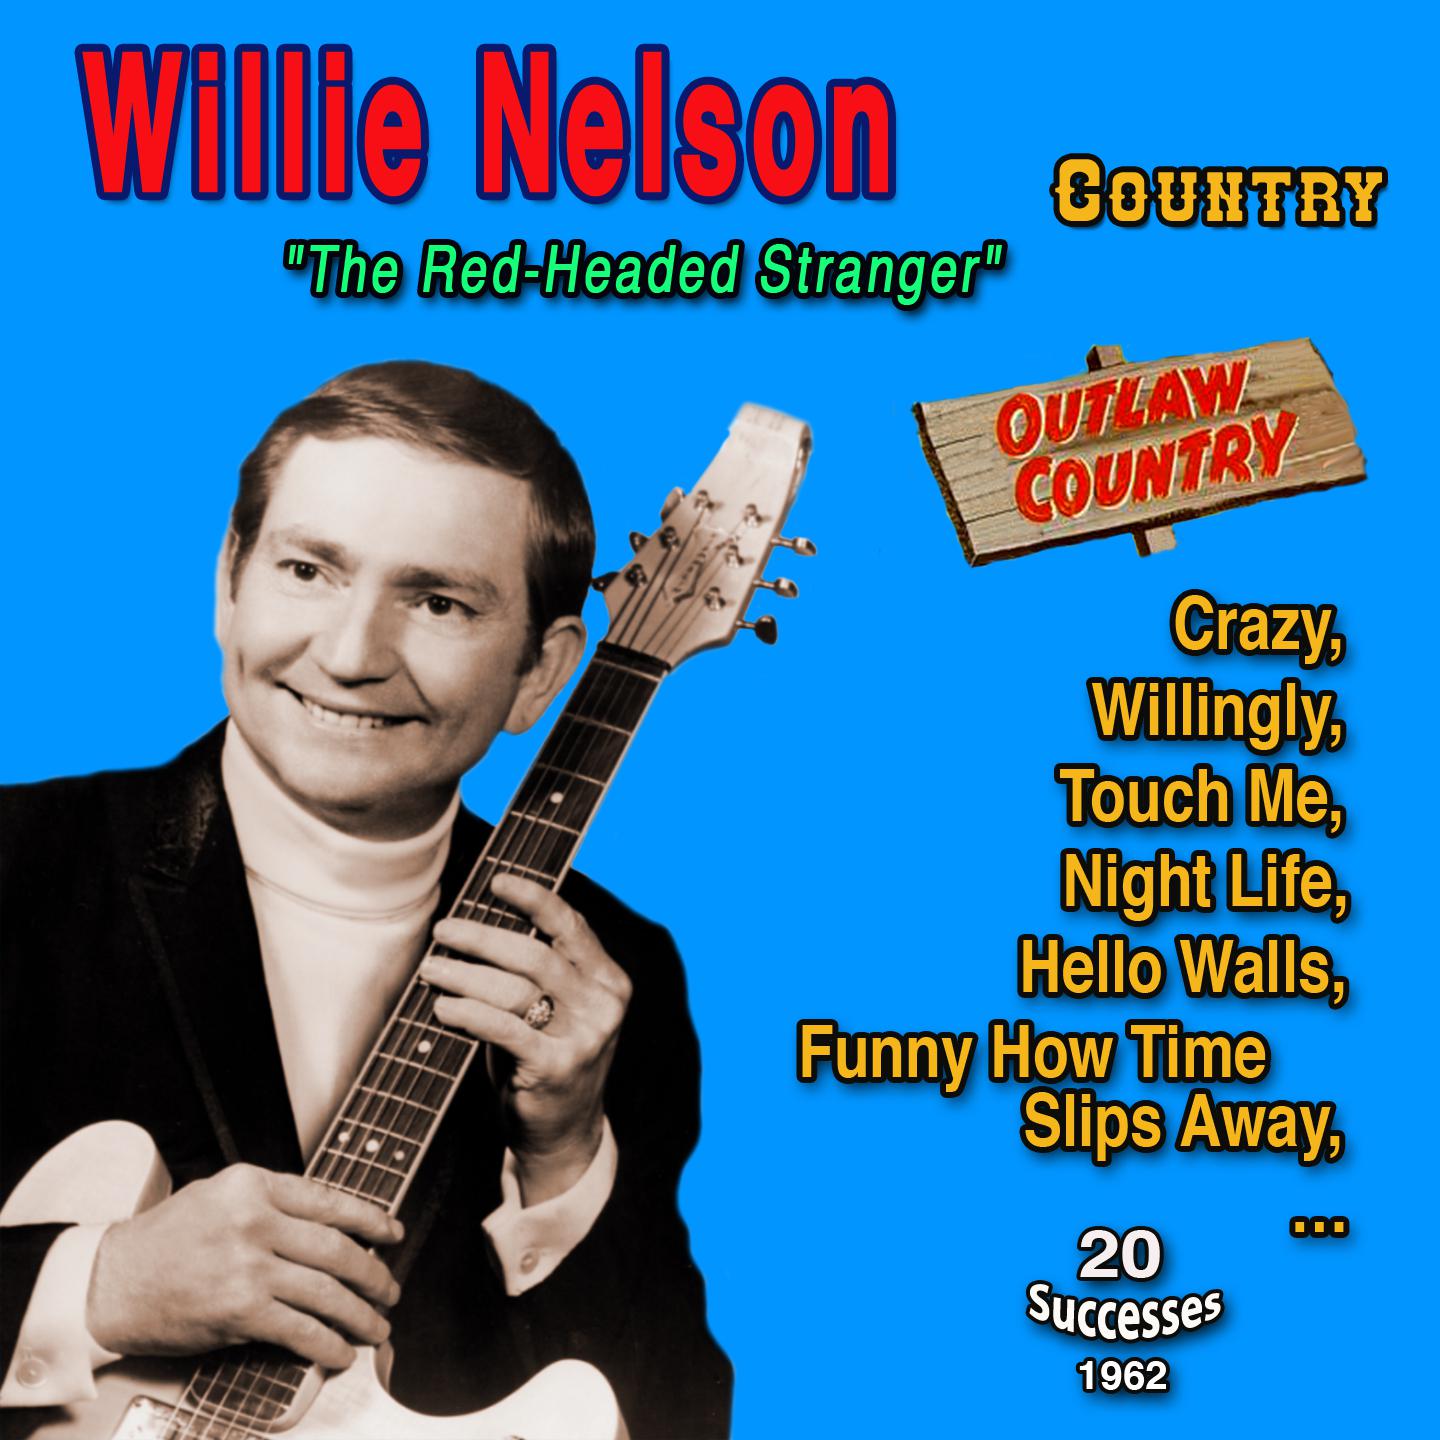 Постер альбома Willie Nelson "Progressive and Outlaw Country" 20 Successes